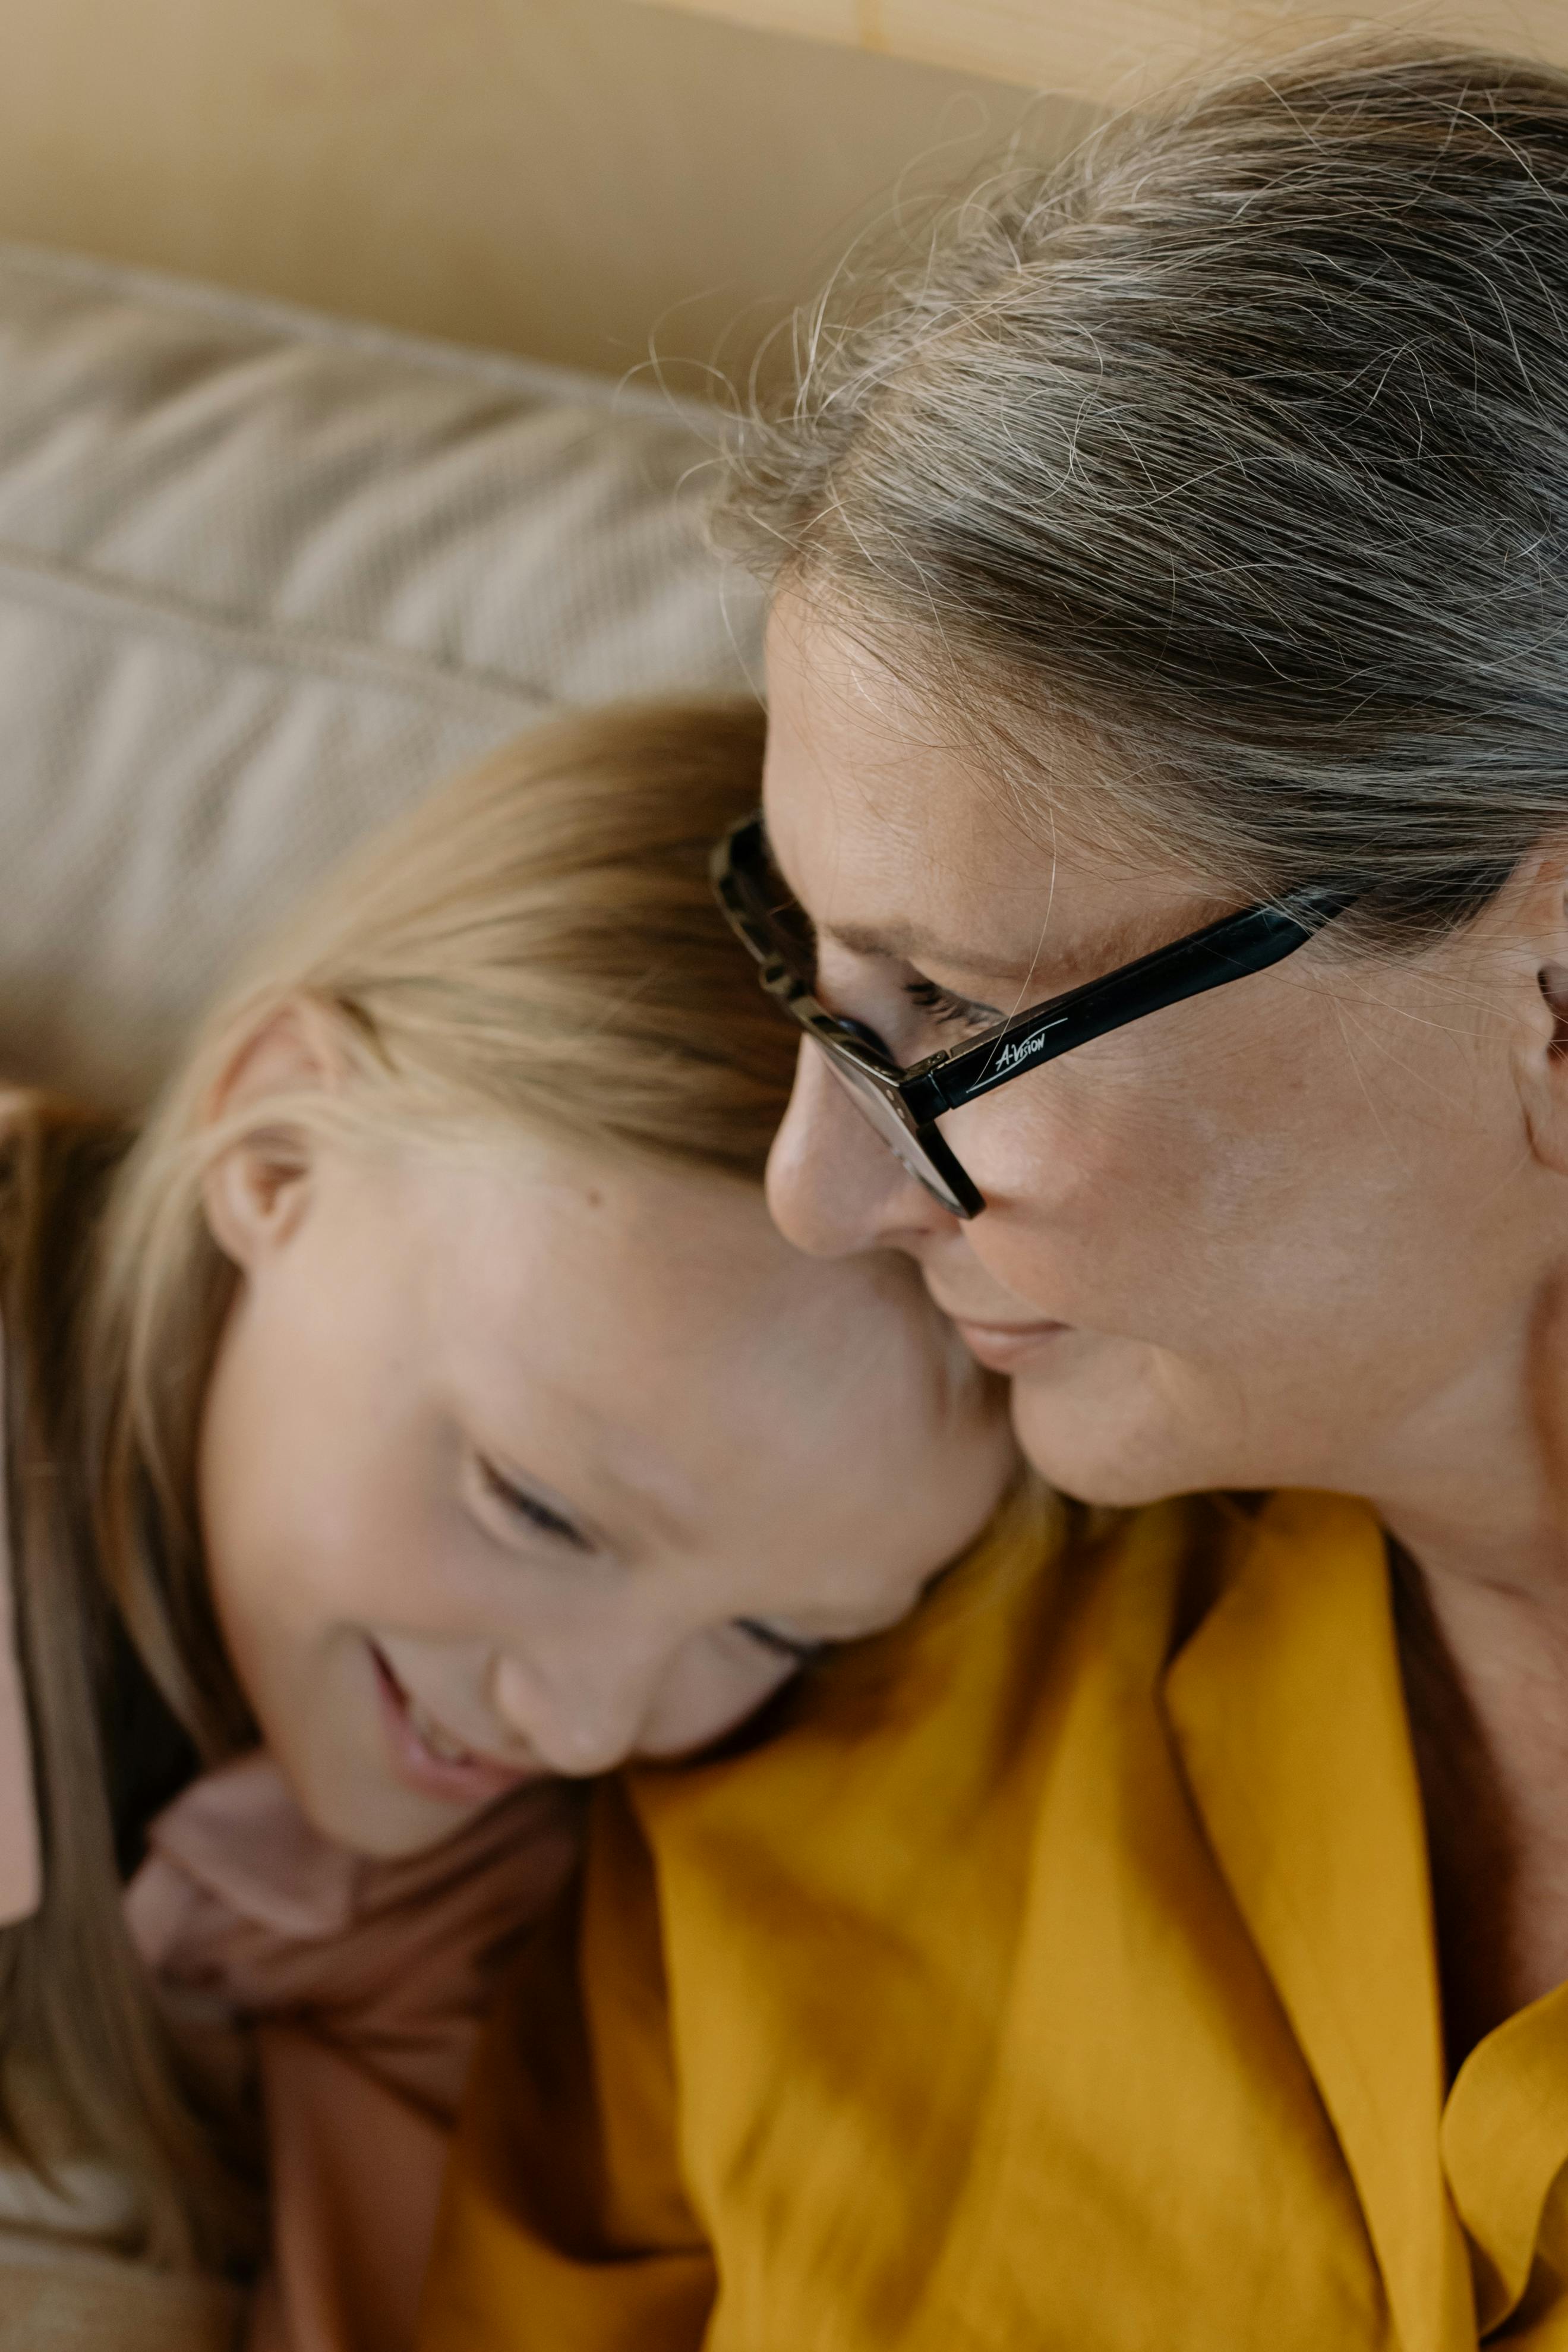 A grandmother and granddaughter | Source: Pexels